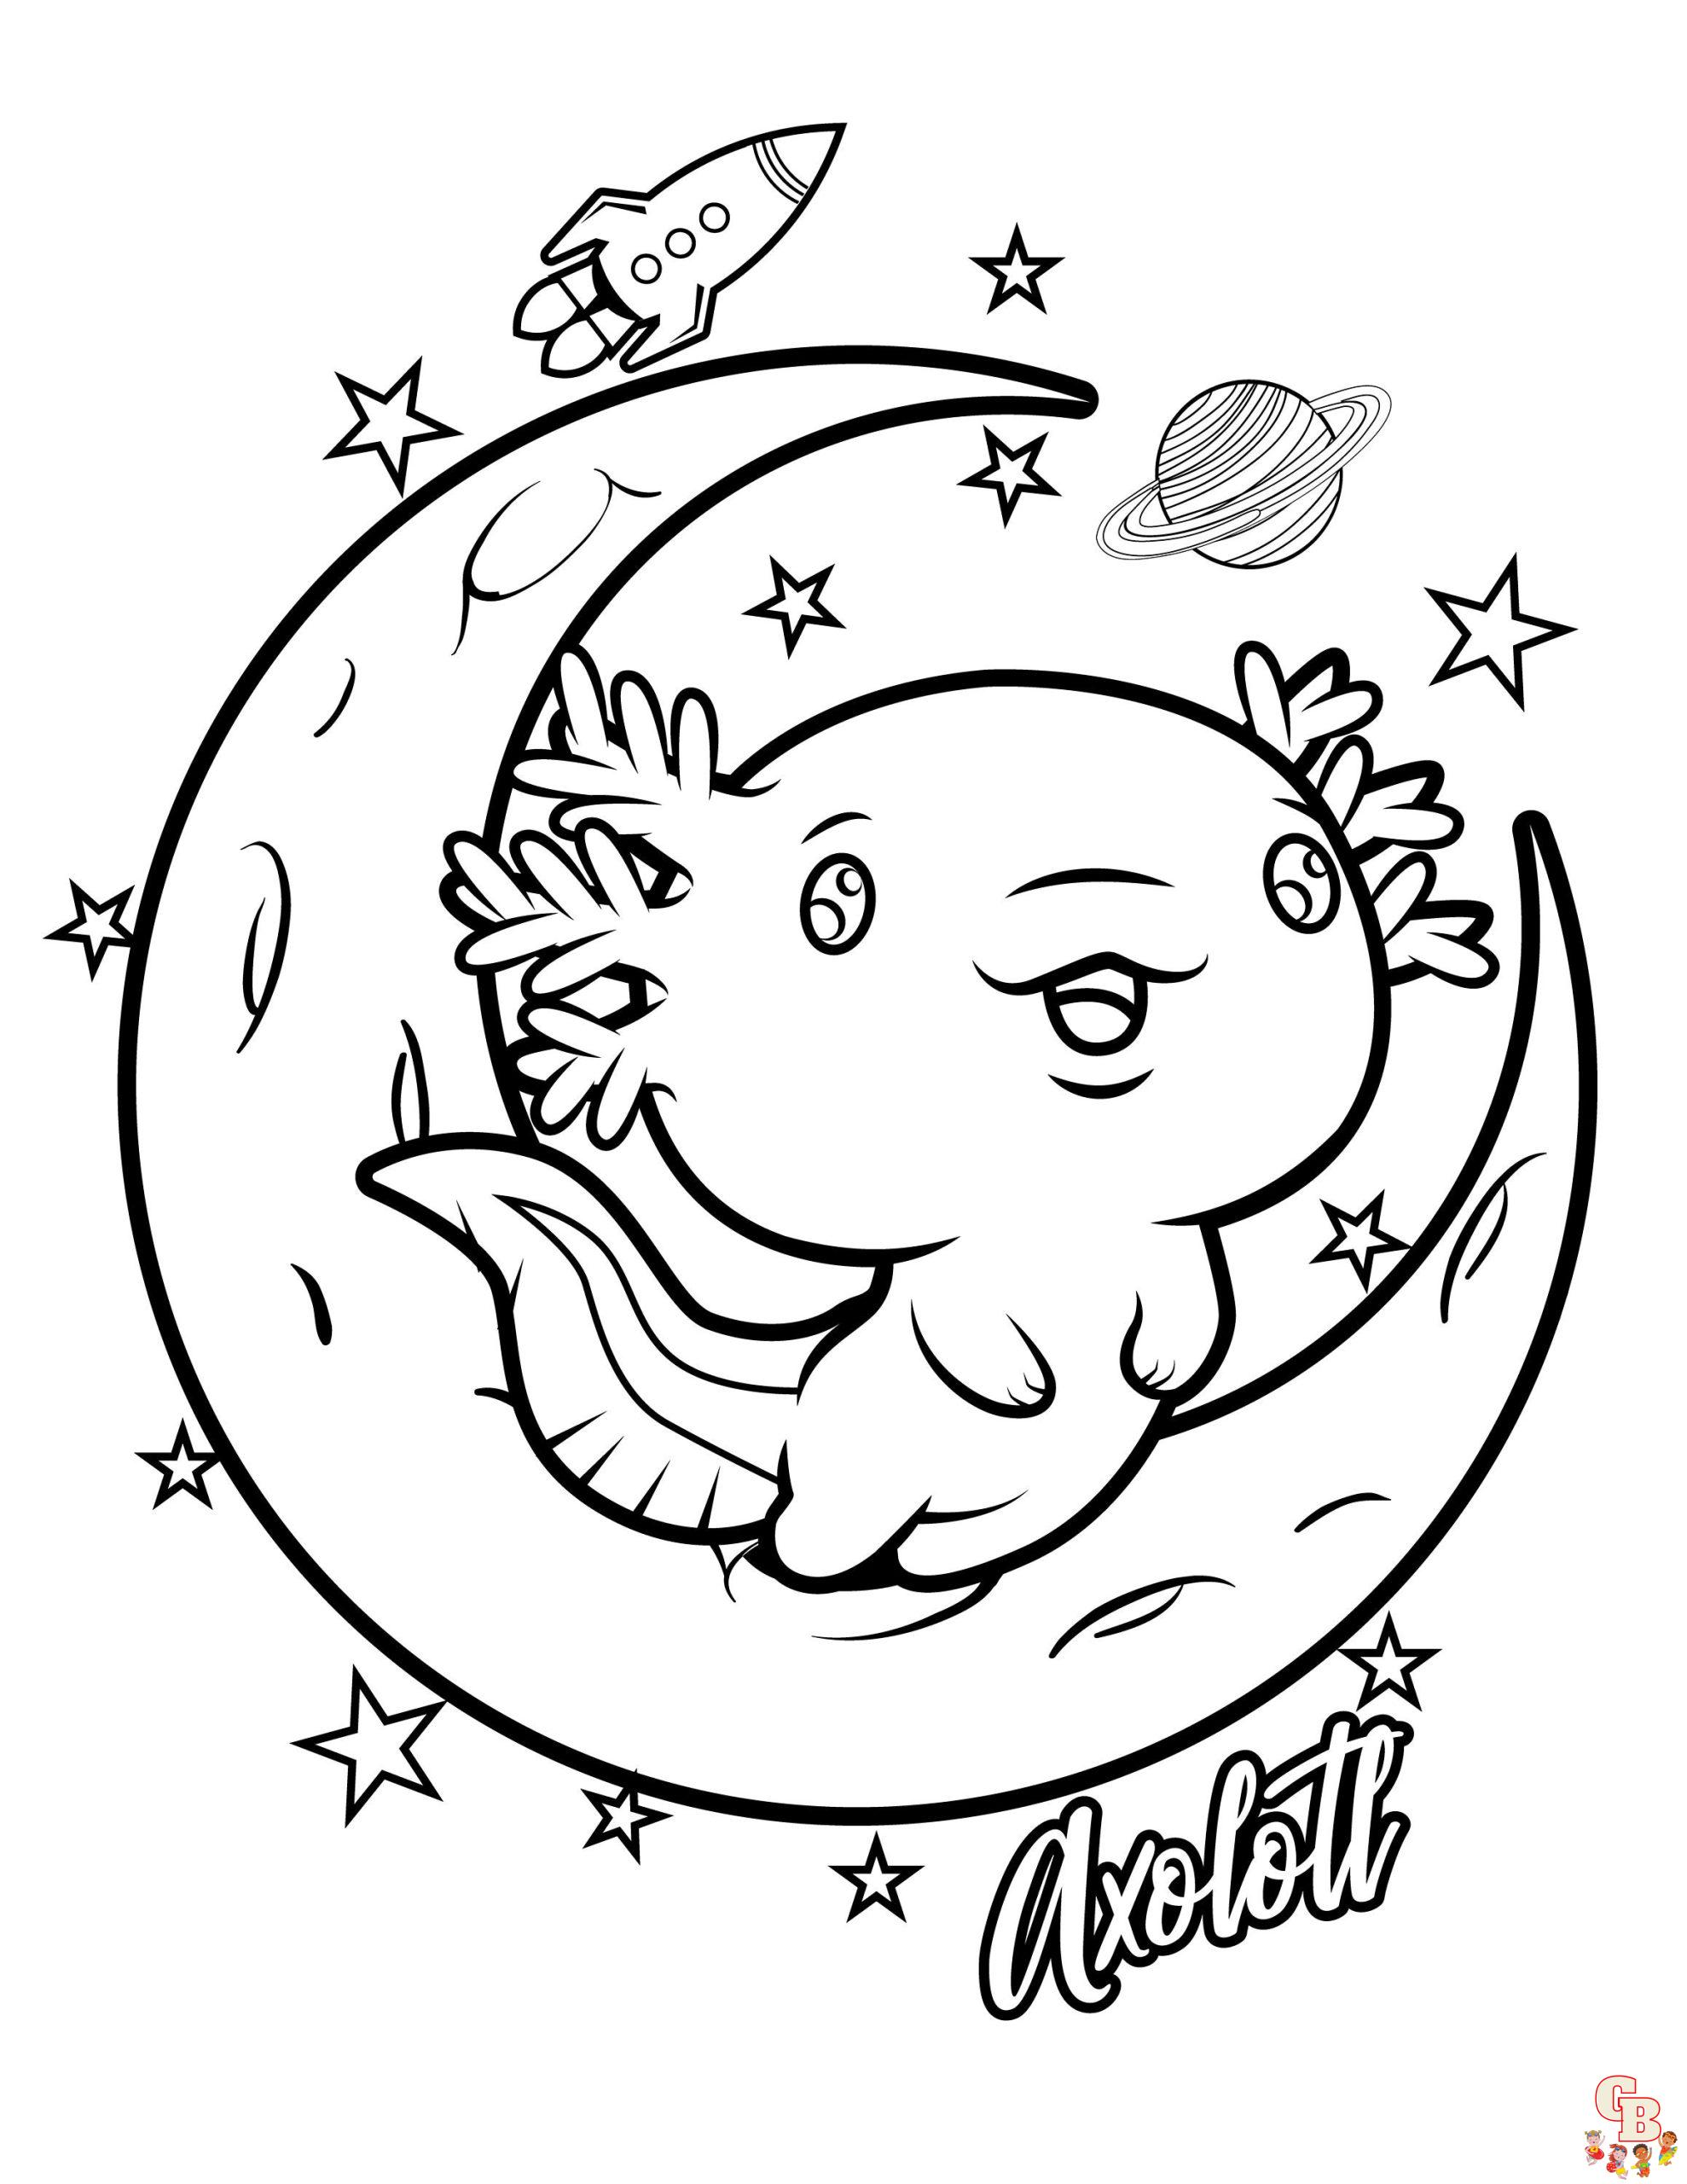 Printable Axolotl Coloring Pages for Kids | GBcoloring